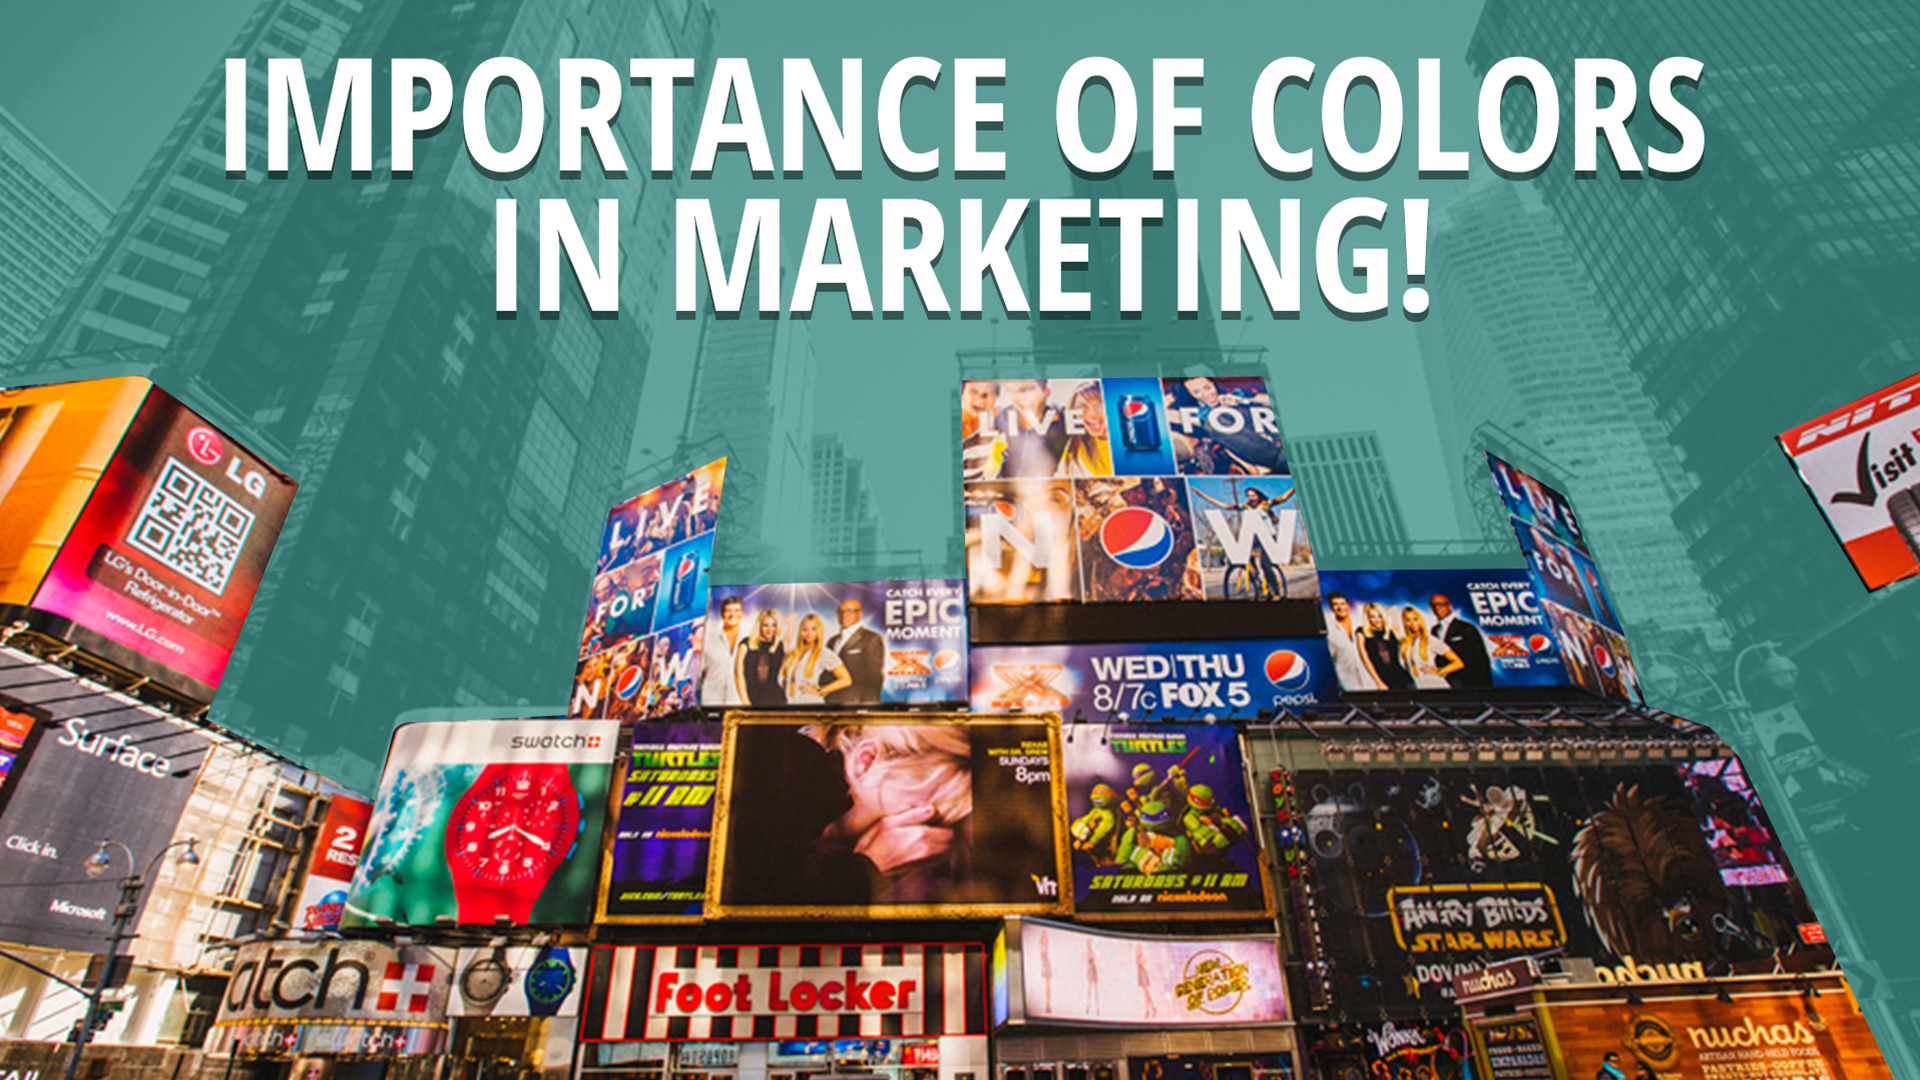 How 21 Brands Use Color to Influence Customers - crowdspring Blog